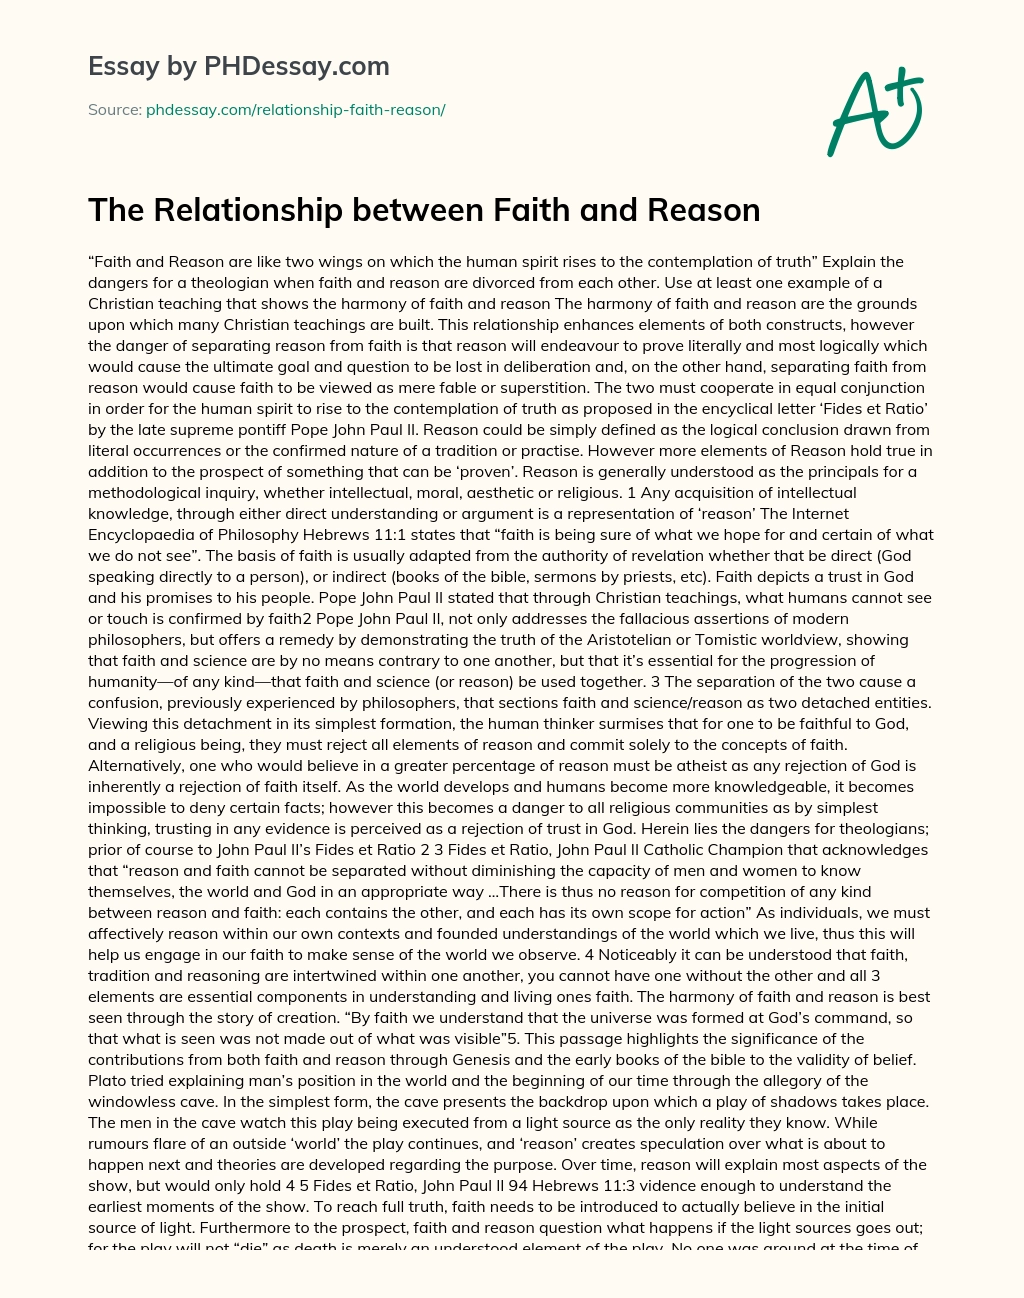 The Relationship between Faith and Reason essay